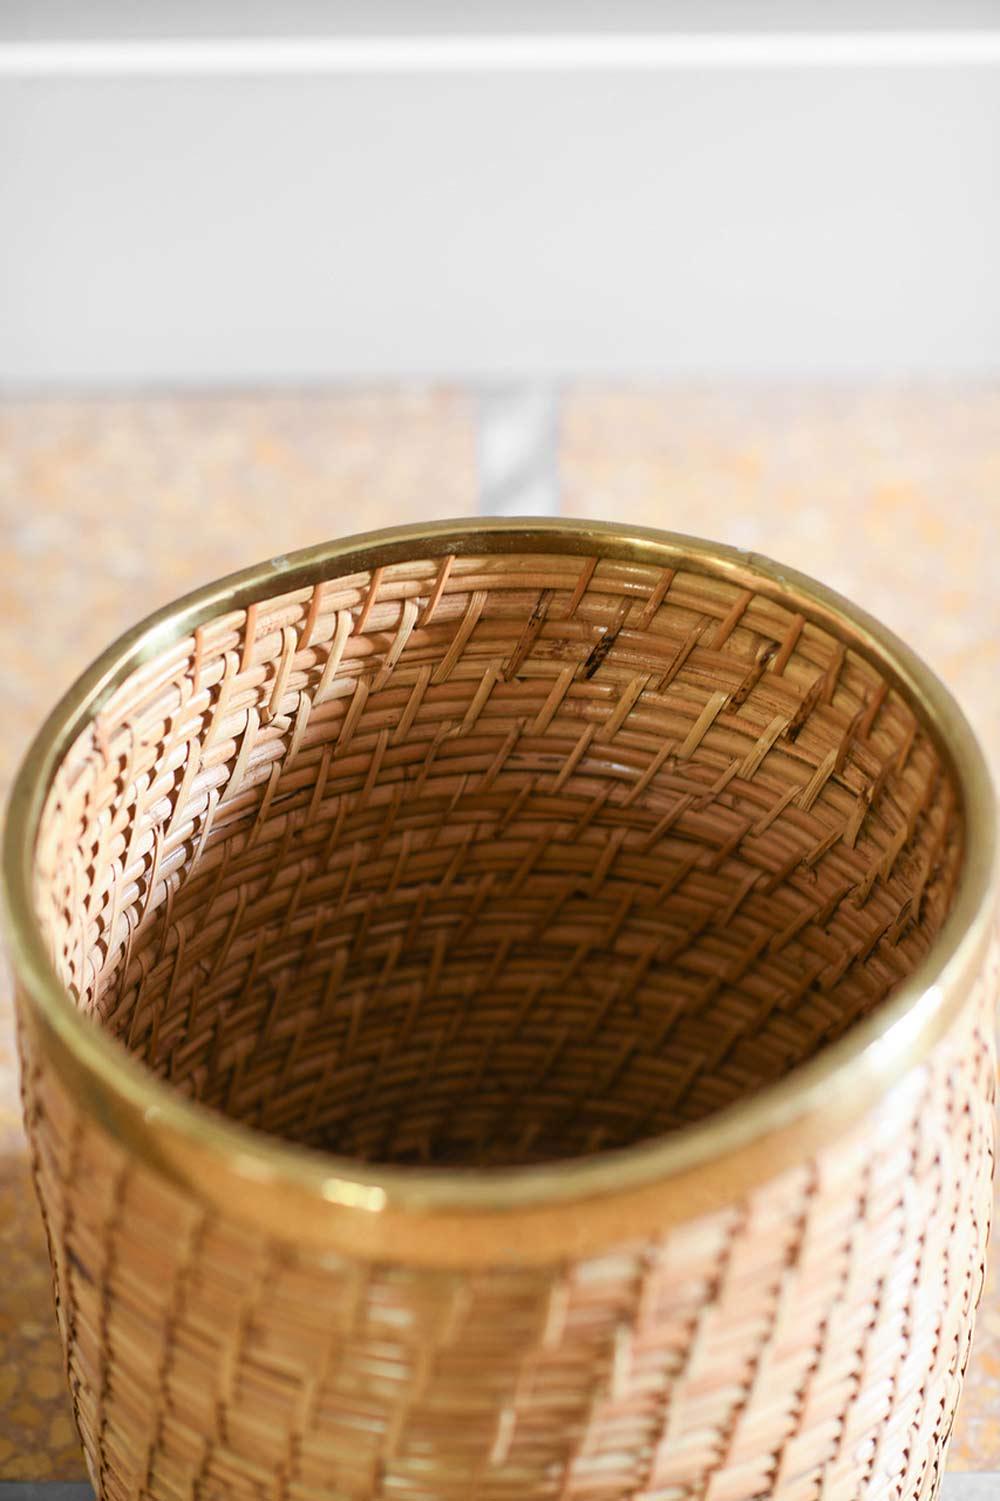 Wicker and brass vase holder, 1980s.
Dimensions: 32 w x 32 h x 32 d cm
Materials: wicker, brass
Production: Italian production 1980